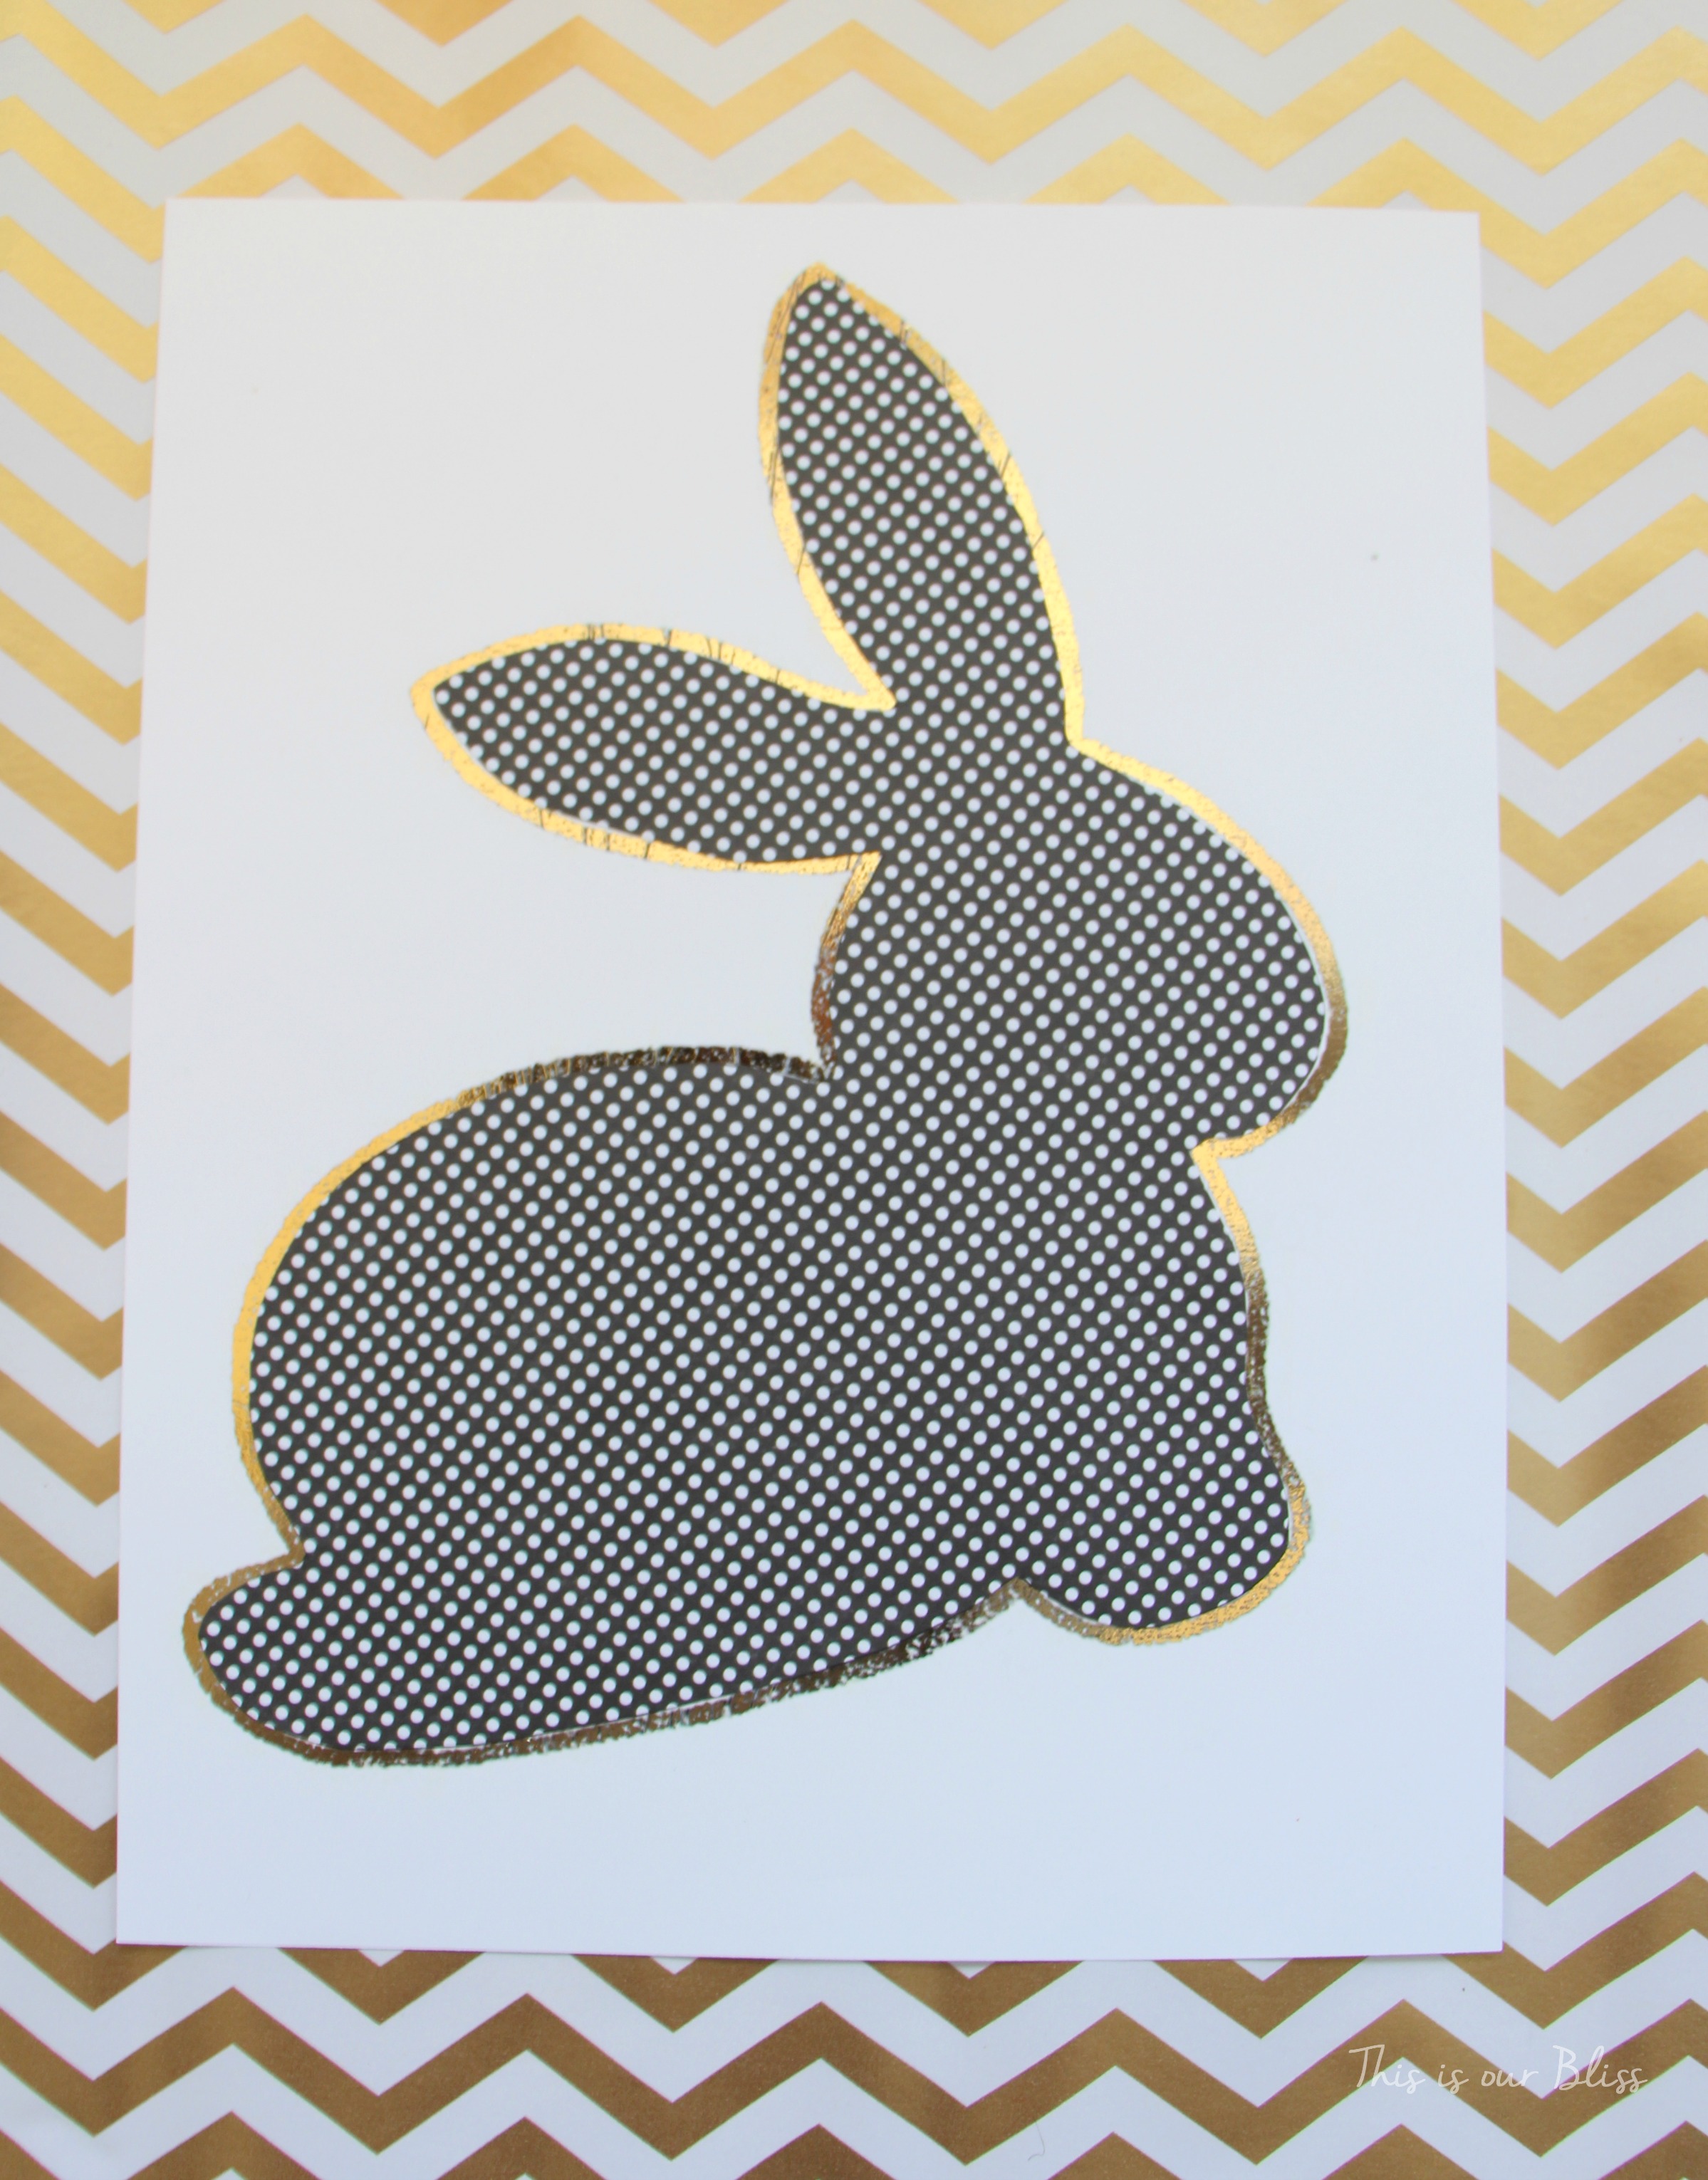 Bunny printable - trace onto paper - cut out to use as a stencil - Chic Easter art - black white and gold - This is our Bliss 6